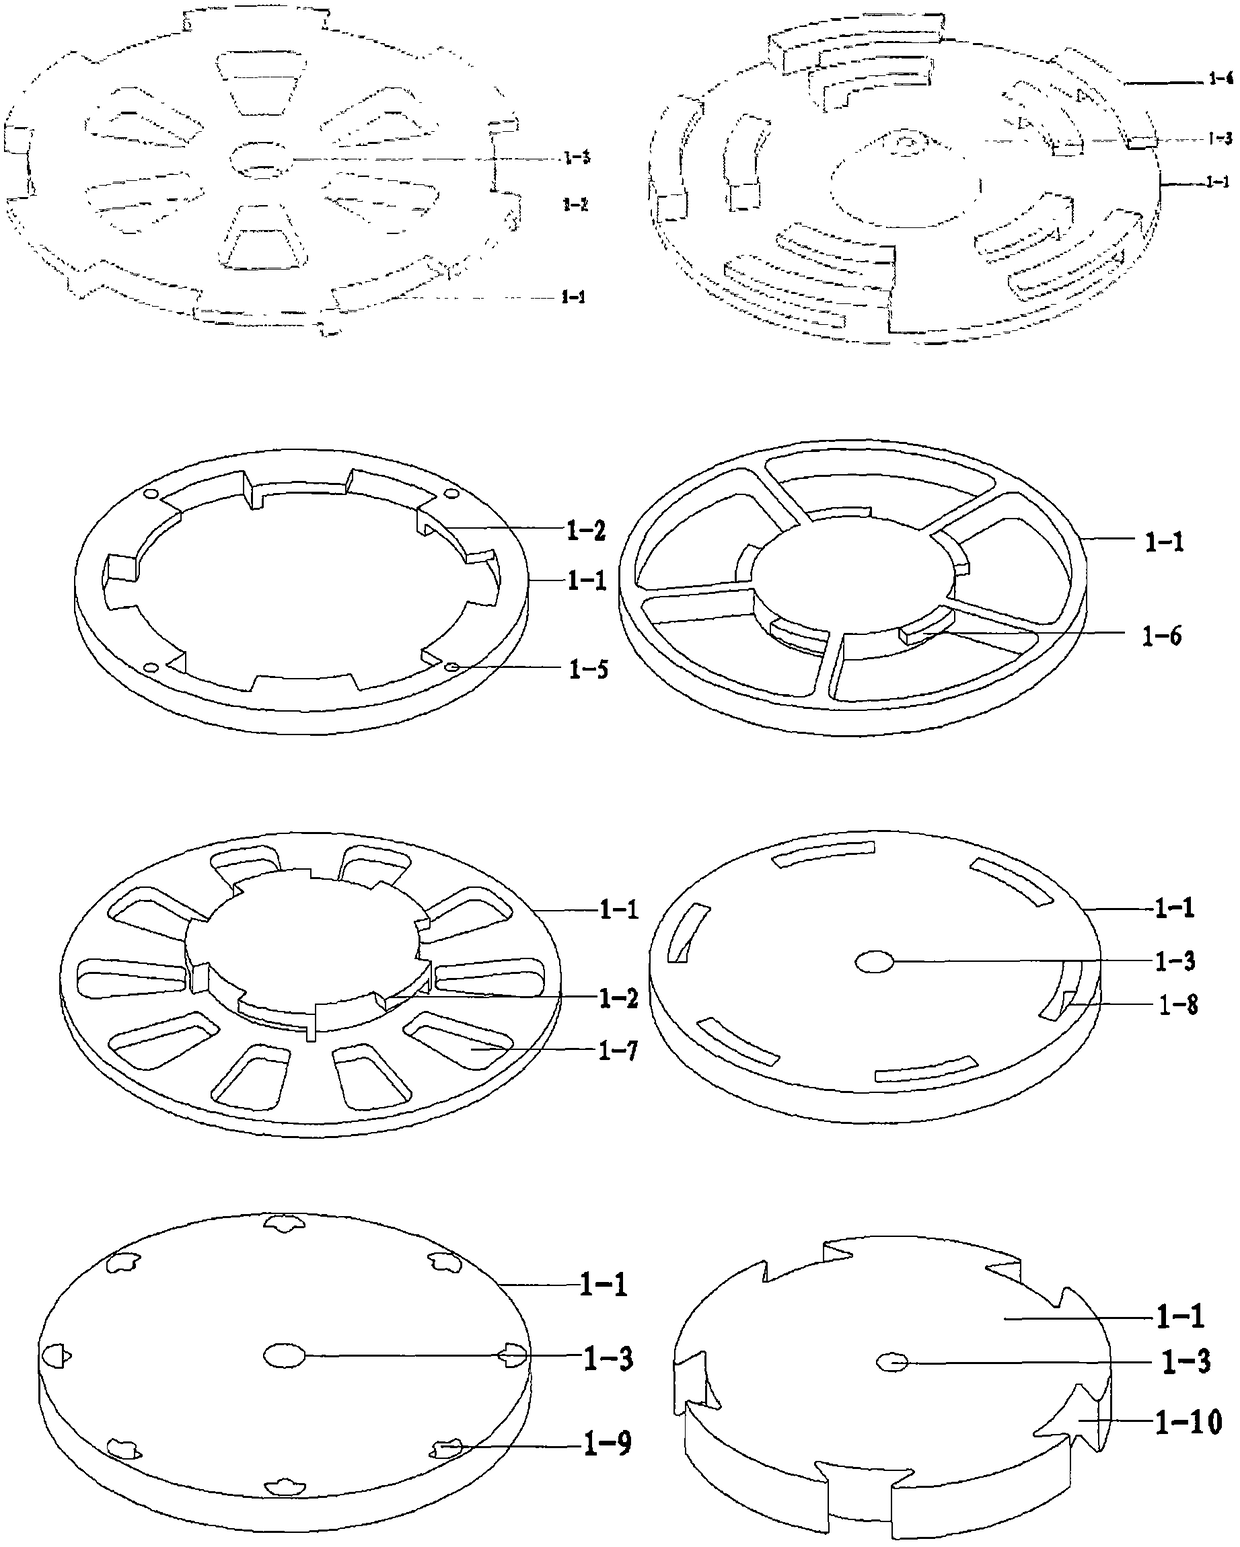 Directly-driven centrifugal separation device